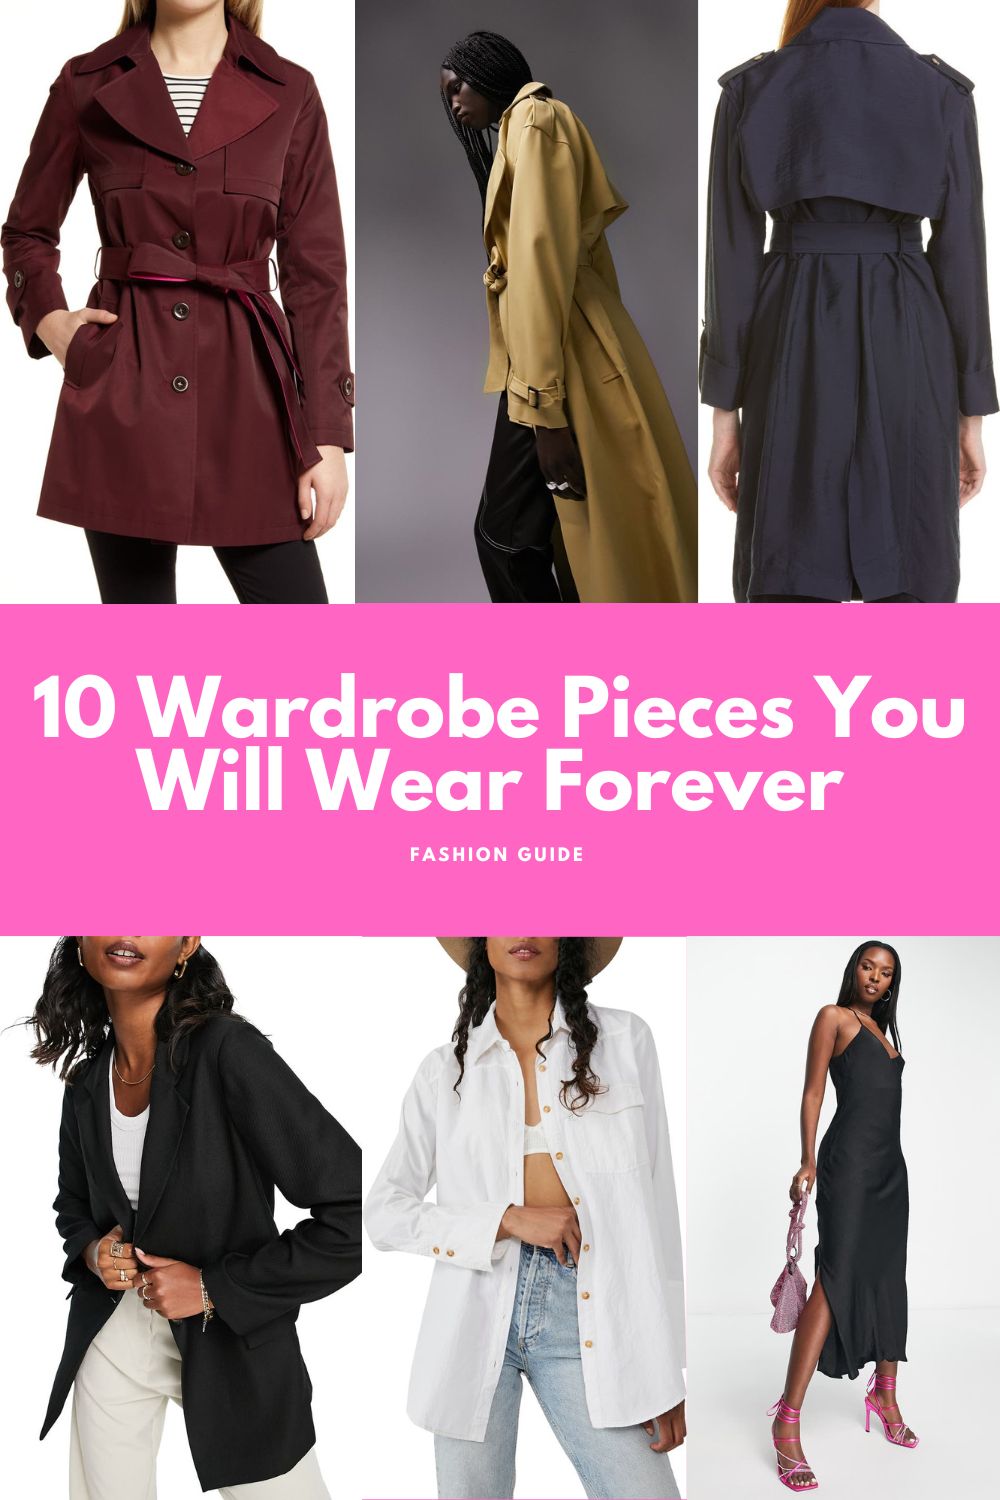 10 Wardrobe Pieces You Will Wear Forever